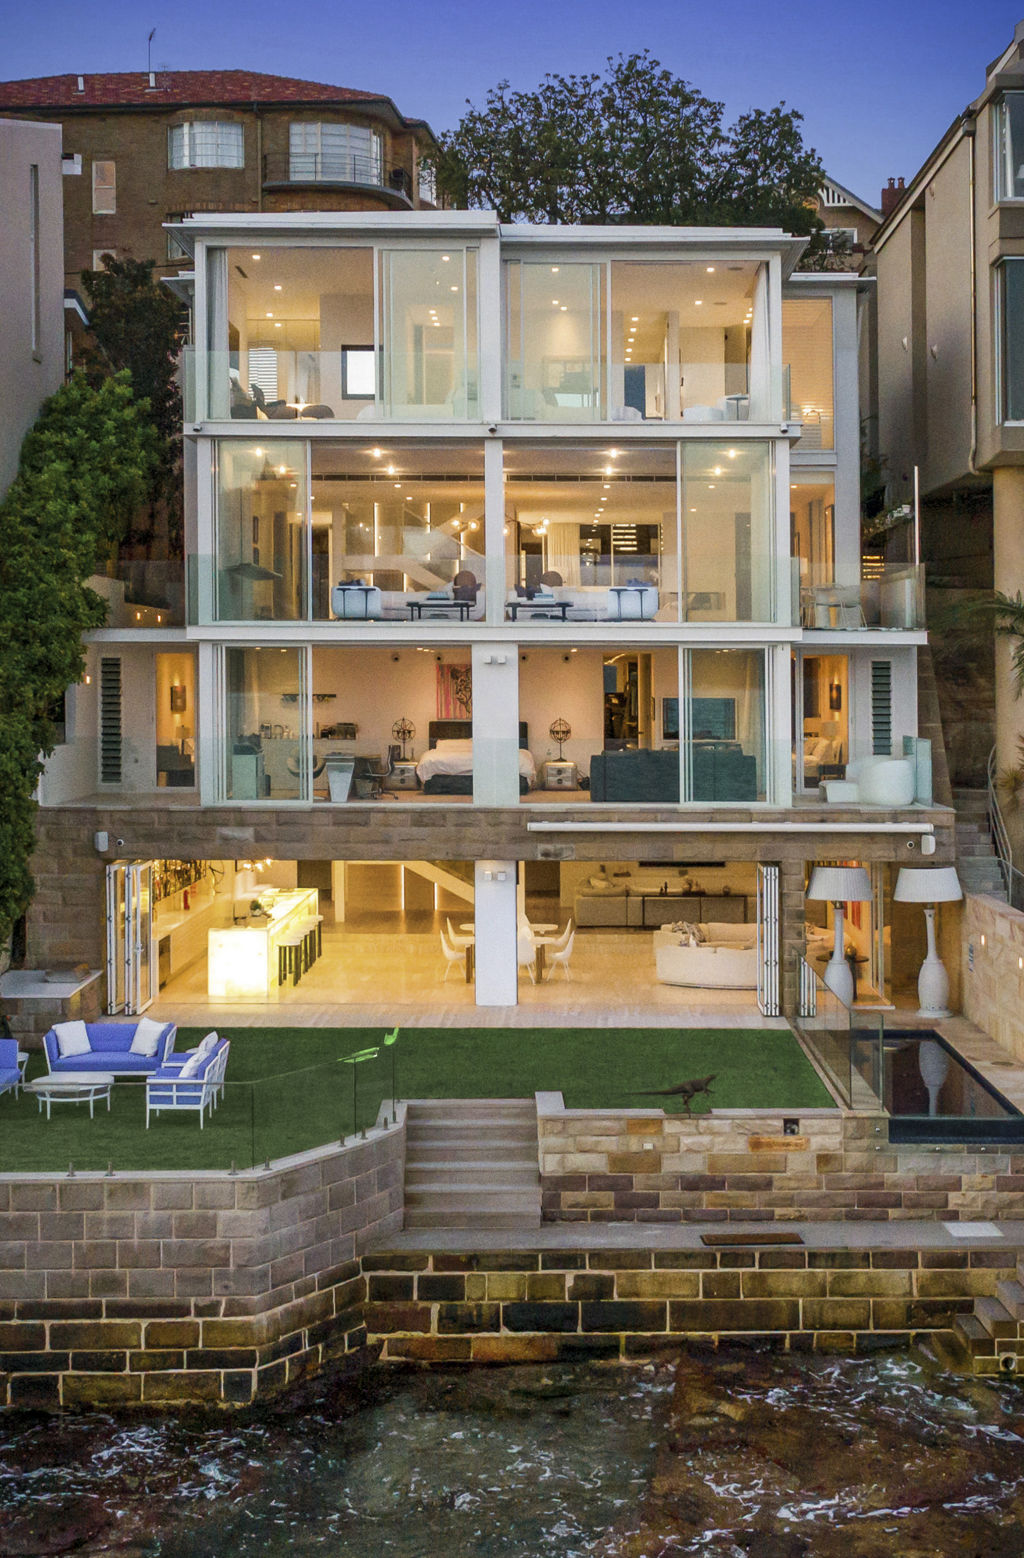 The four-storey residence includes interiors by designer Greg Natale. Photo: Supplied